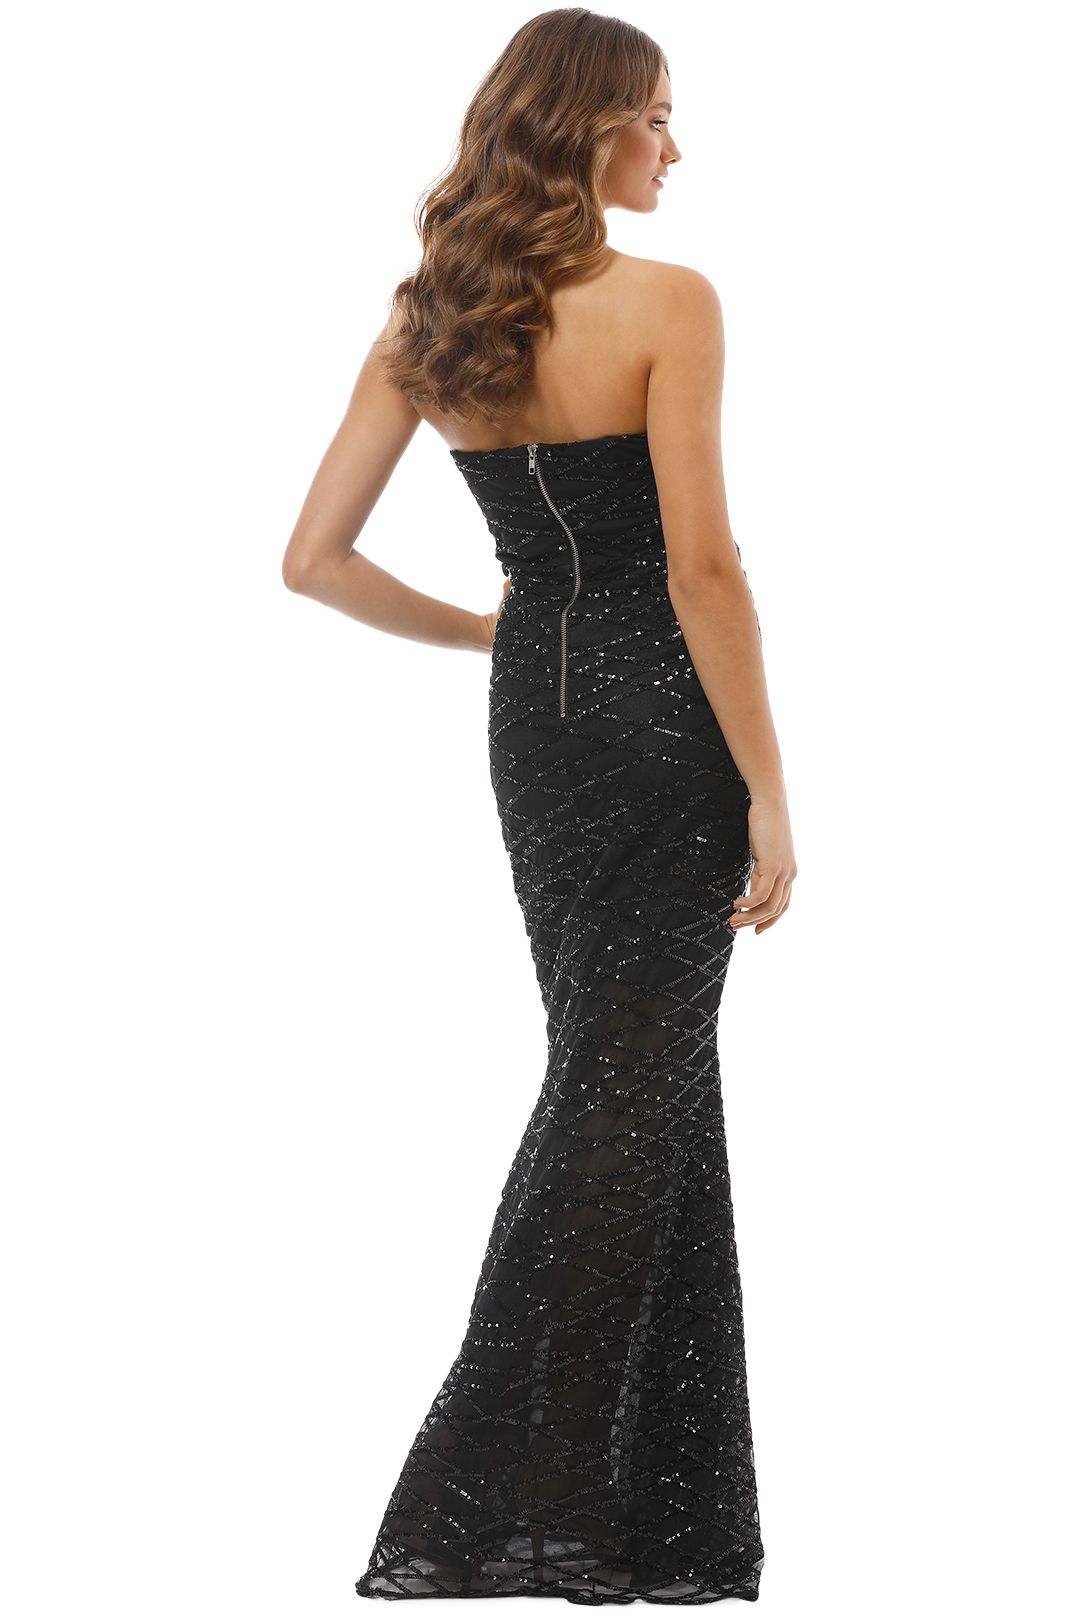 Grace & Hart - Shooting Stars Fitted Gown - Black - Back